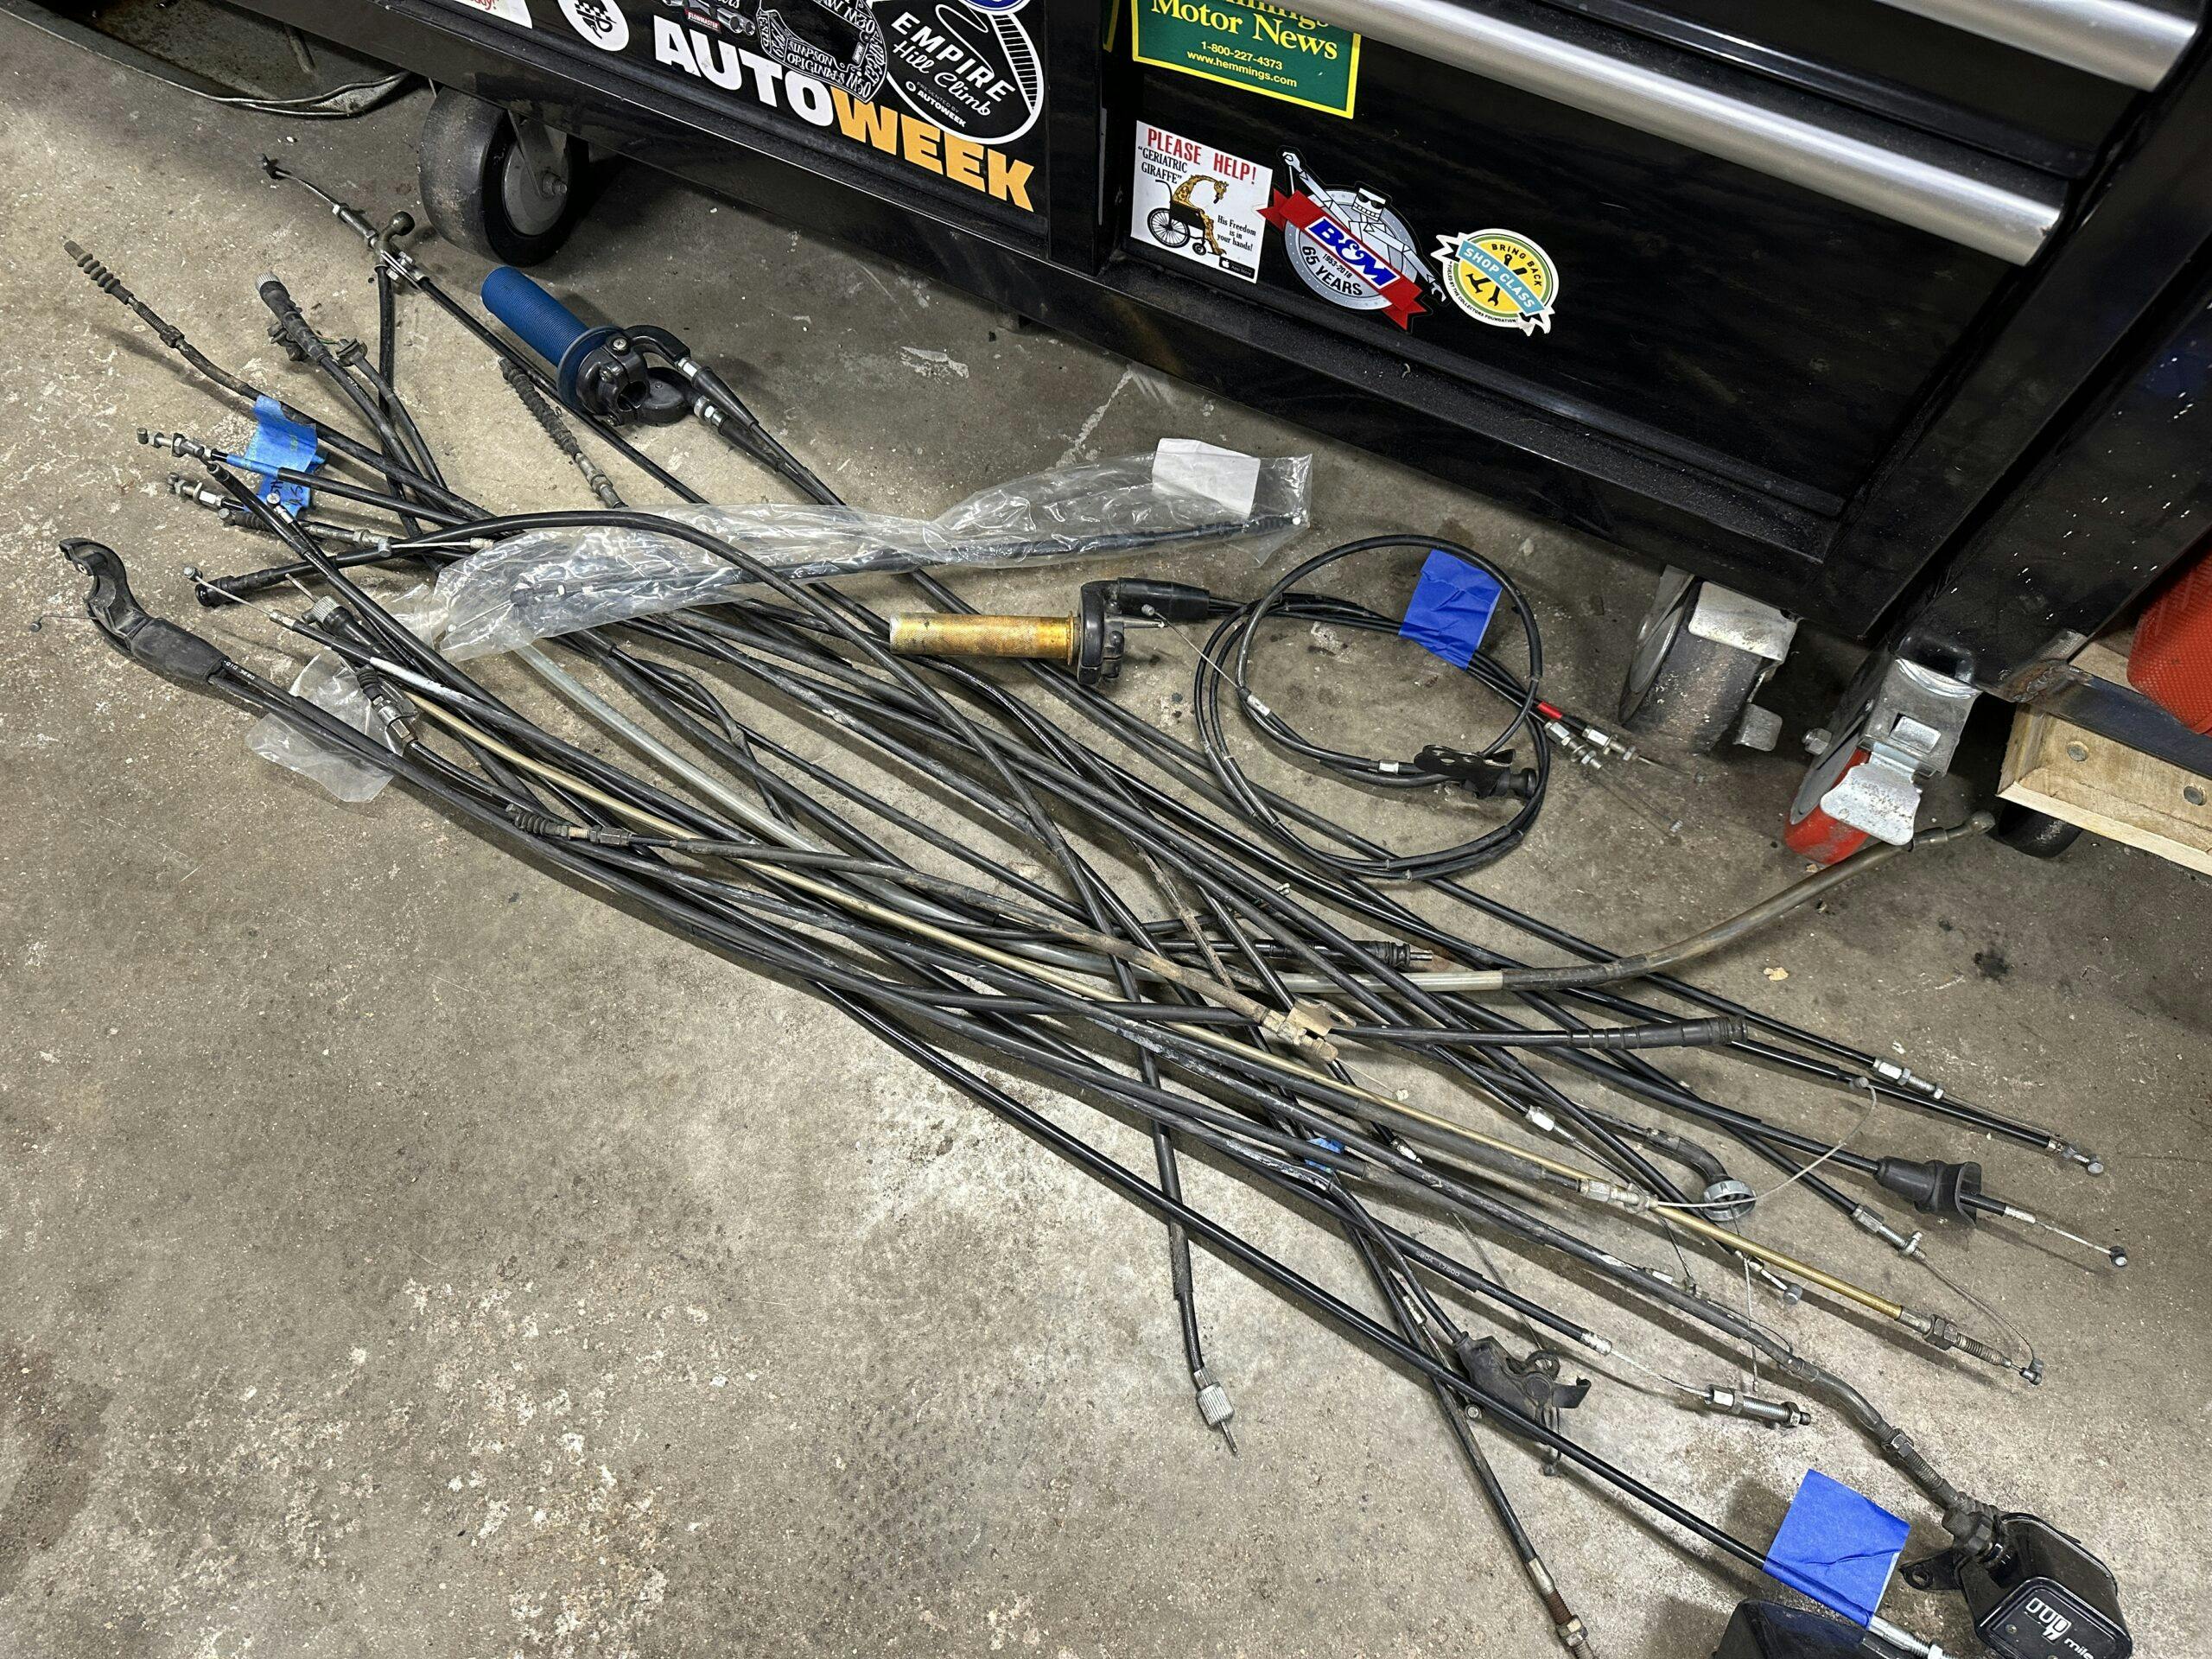 Motorcycle cables on garage floor